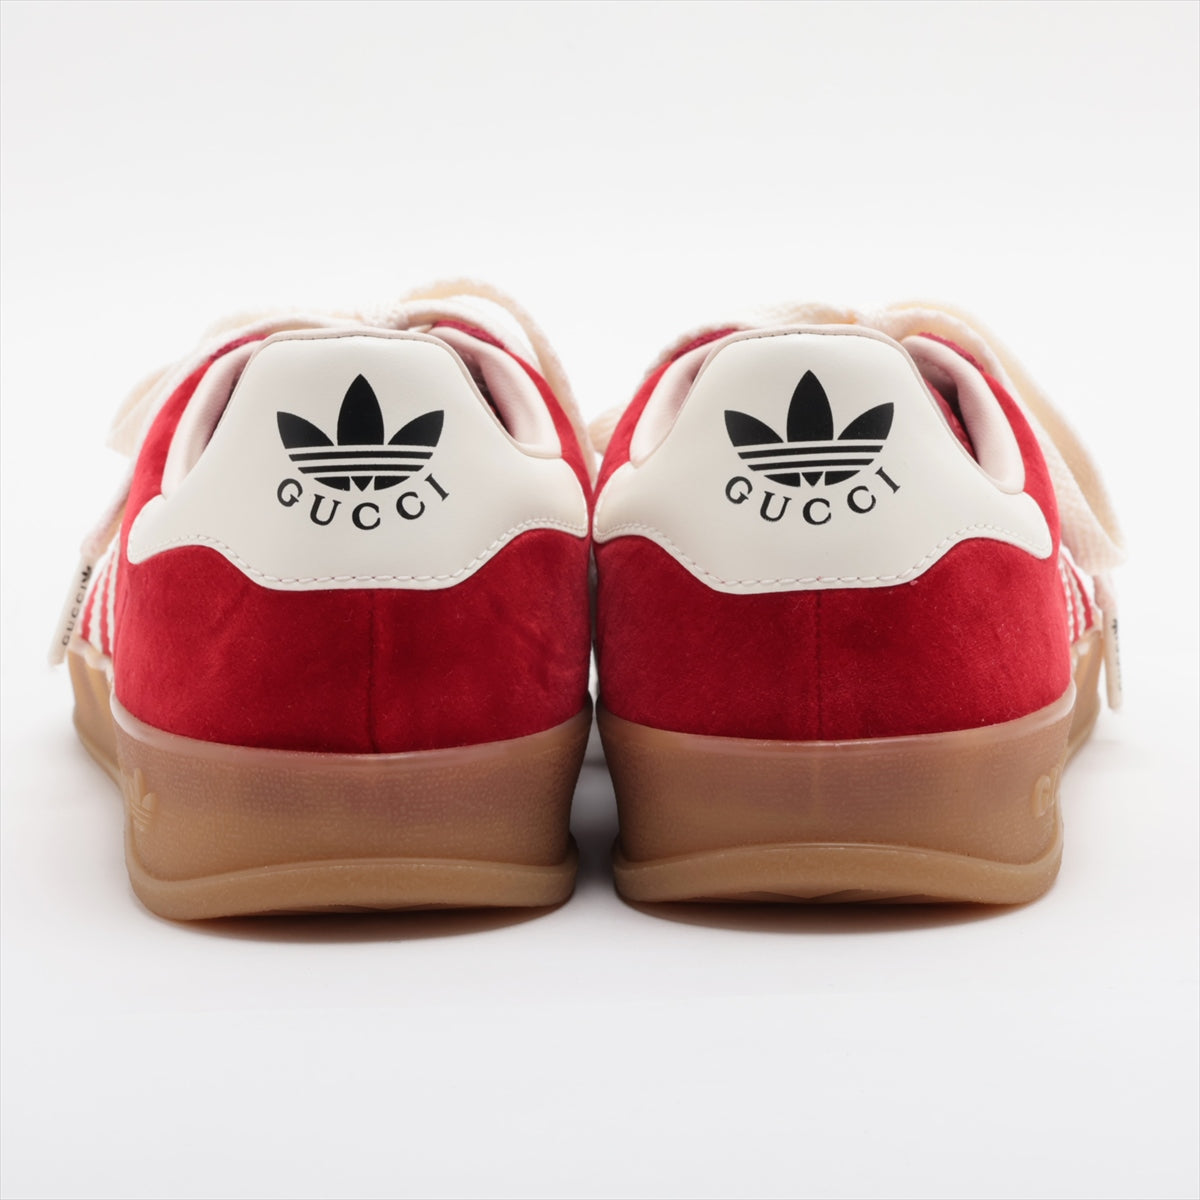 Gucci x Adidas Gasel Belloor x Leather Trainers 25.5cm Unisex Red x White 707848 HQ8853  Homo Box Bag